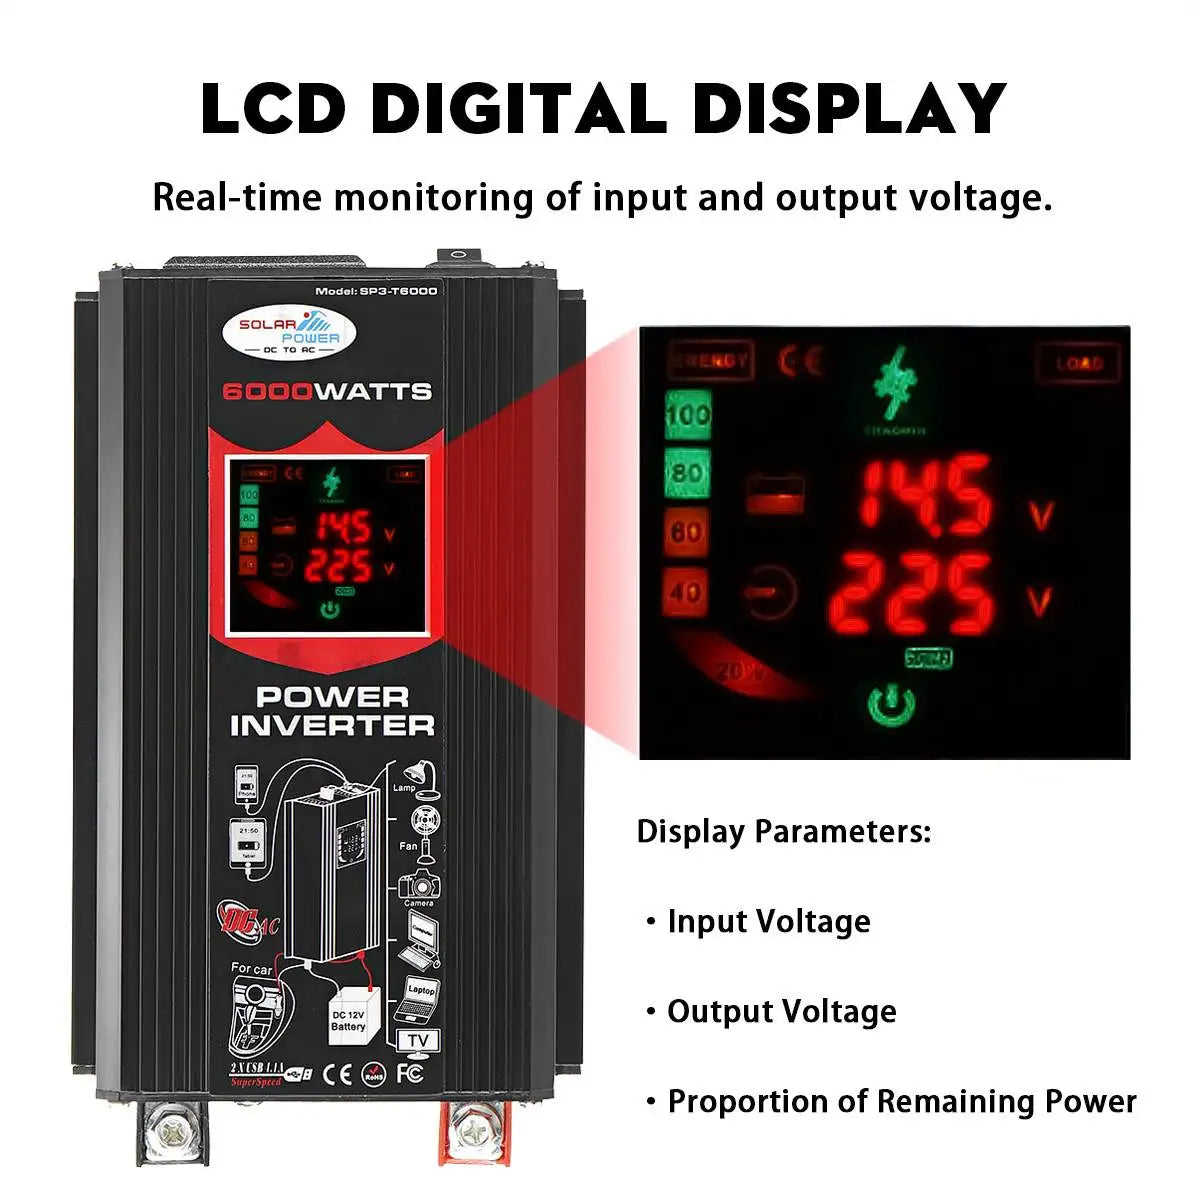 Solar power inverter converts 12V to 110V/220V with real-time monitoring on LCD display.